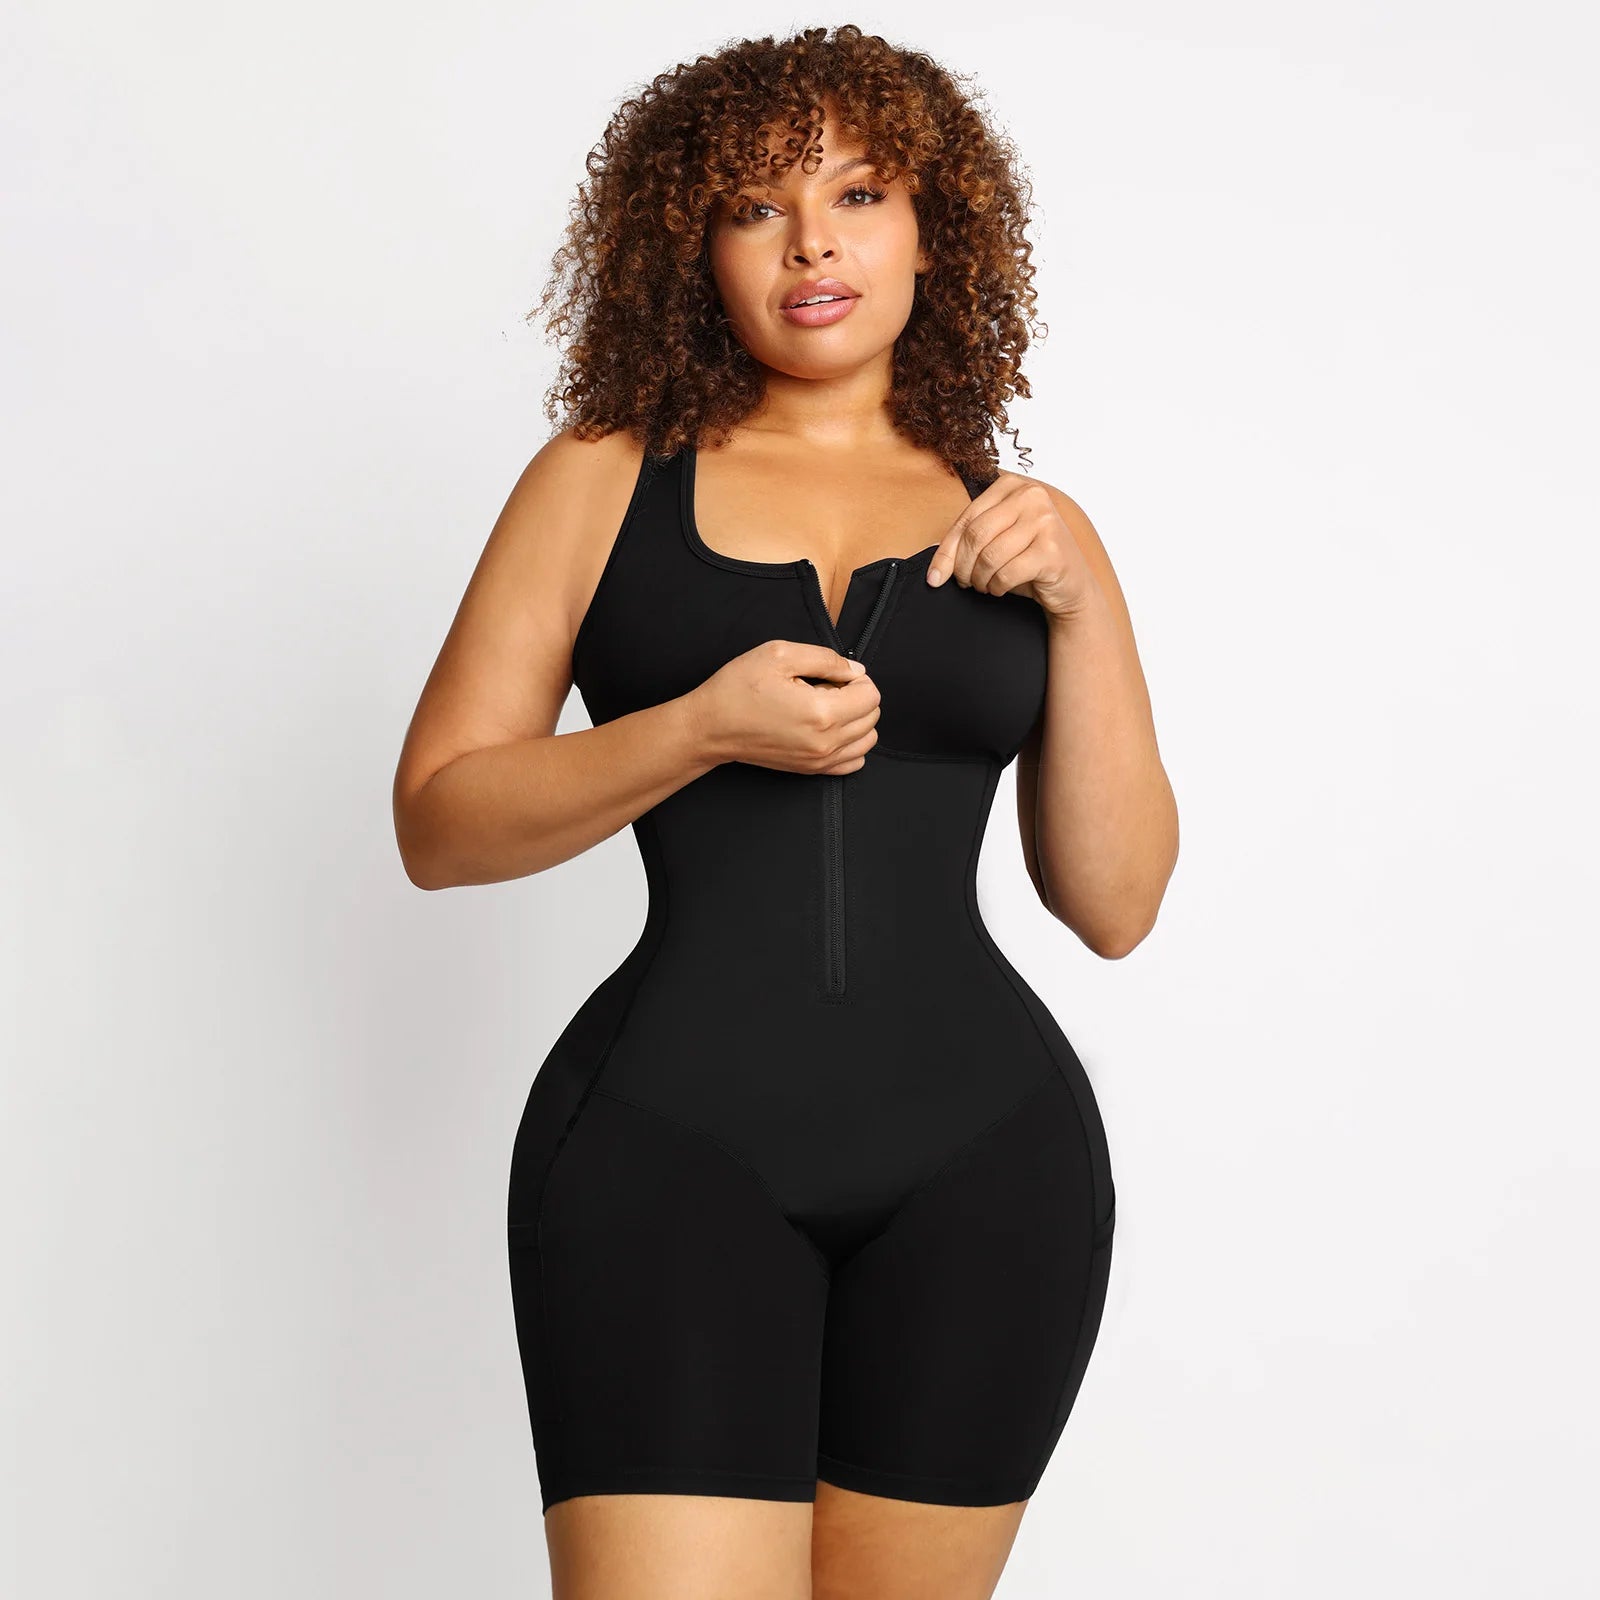 Adjustable Double Compression She Waisted Body Shaper For